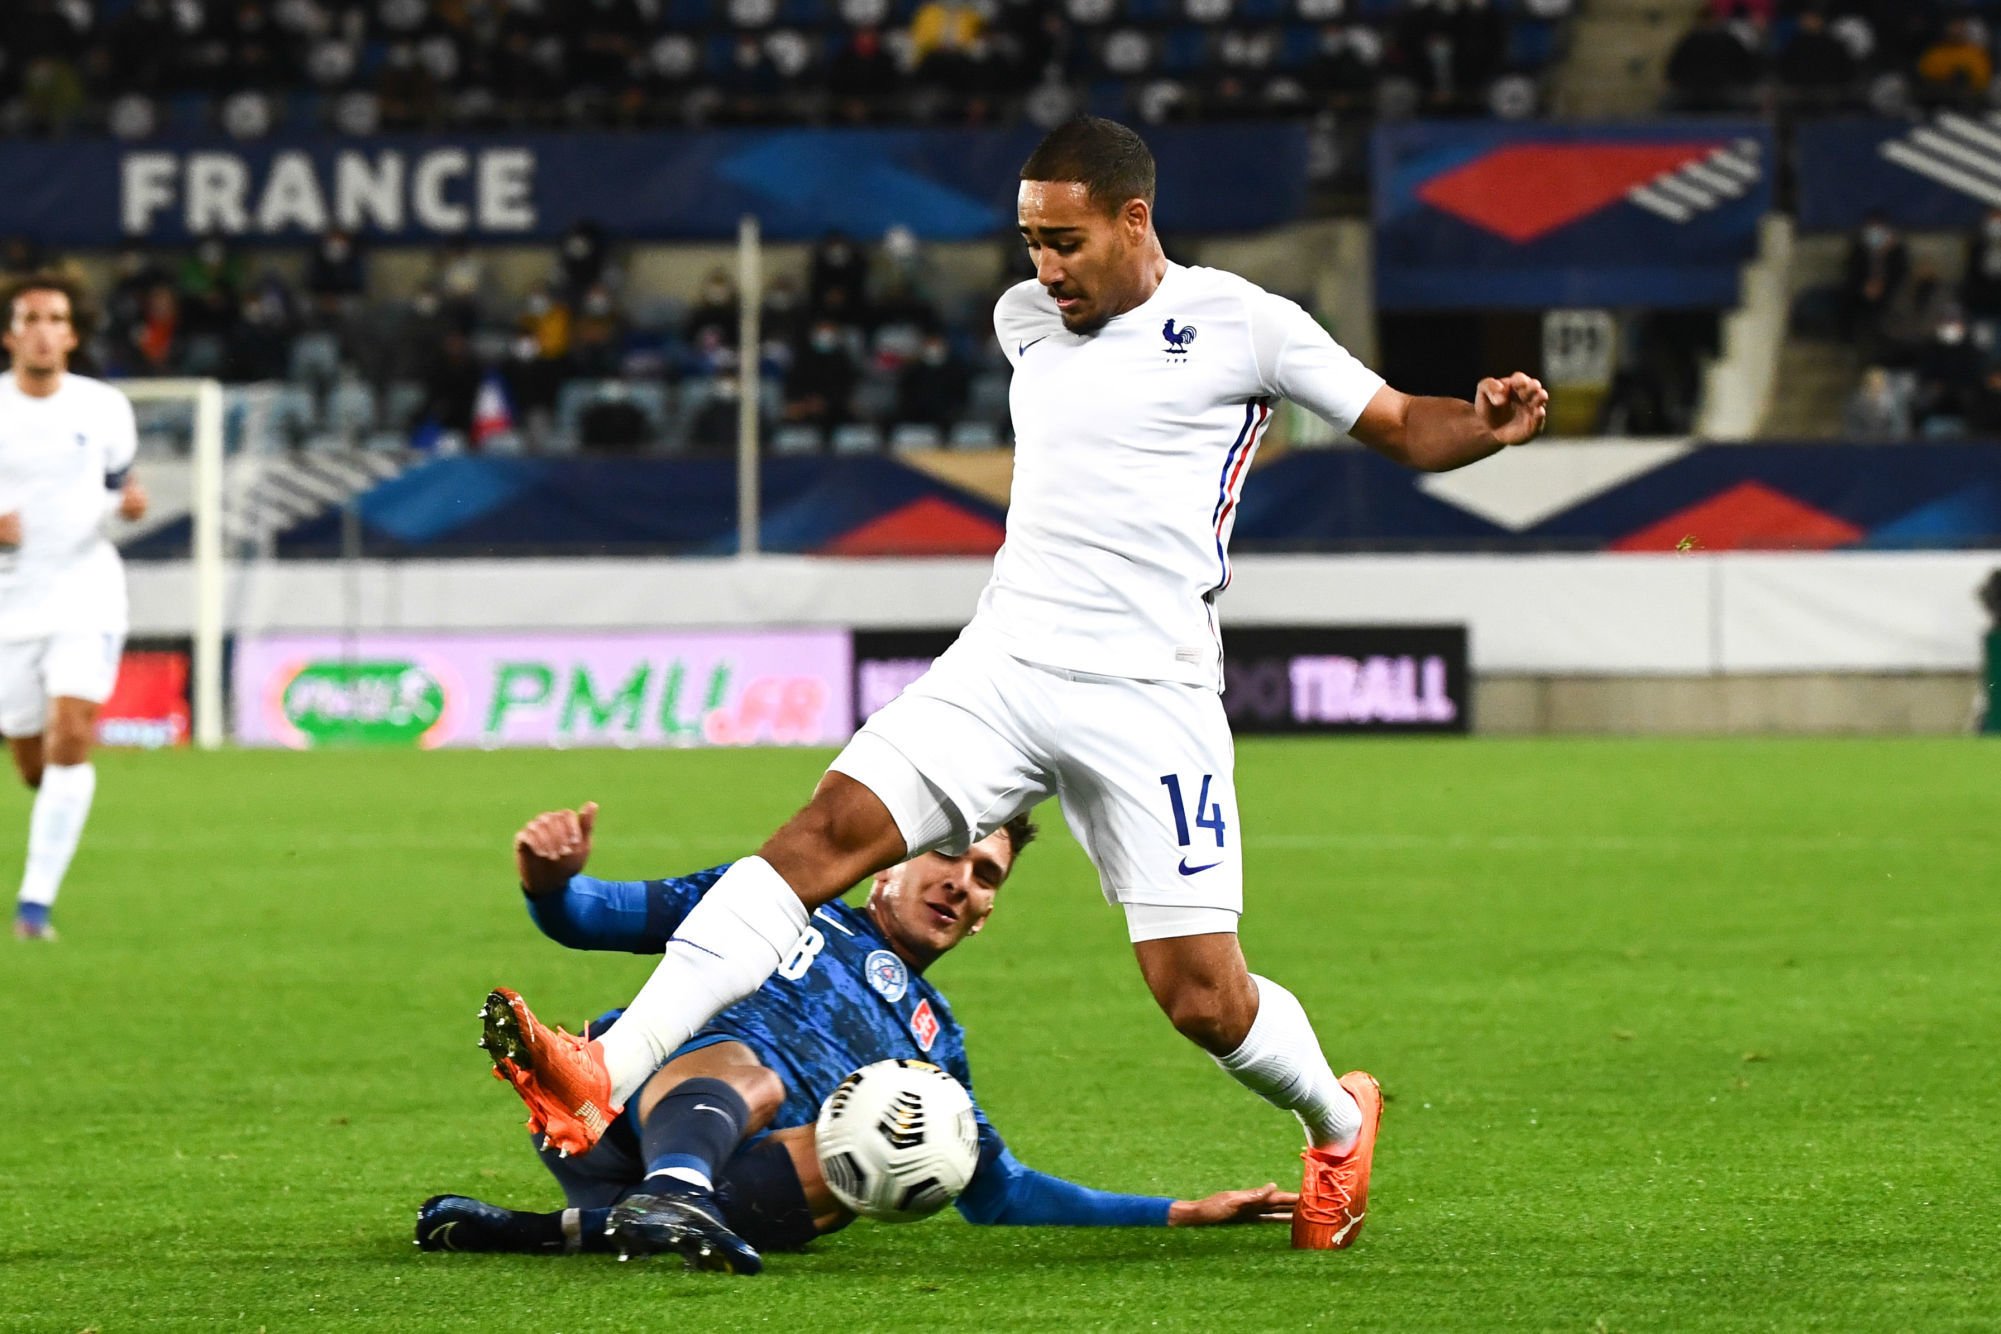 David DURIS of Slovakia and Yvann MACON of France during the European Championship qualification match between France and Slovakia at La Meinau Stadium on October 12, 2020 in Strasbourg, France. (Photo by Sebastien Bozon/Icon Sport) - Yvann MACON - David DURIS - Stade de la Meinau - Strasbourg (France)